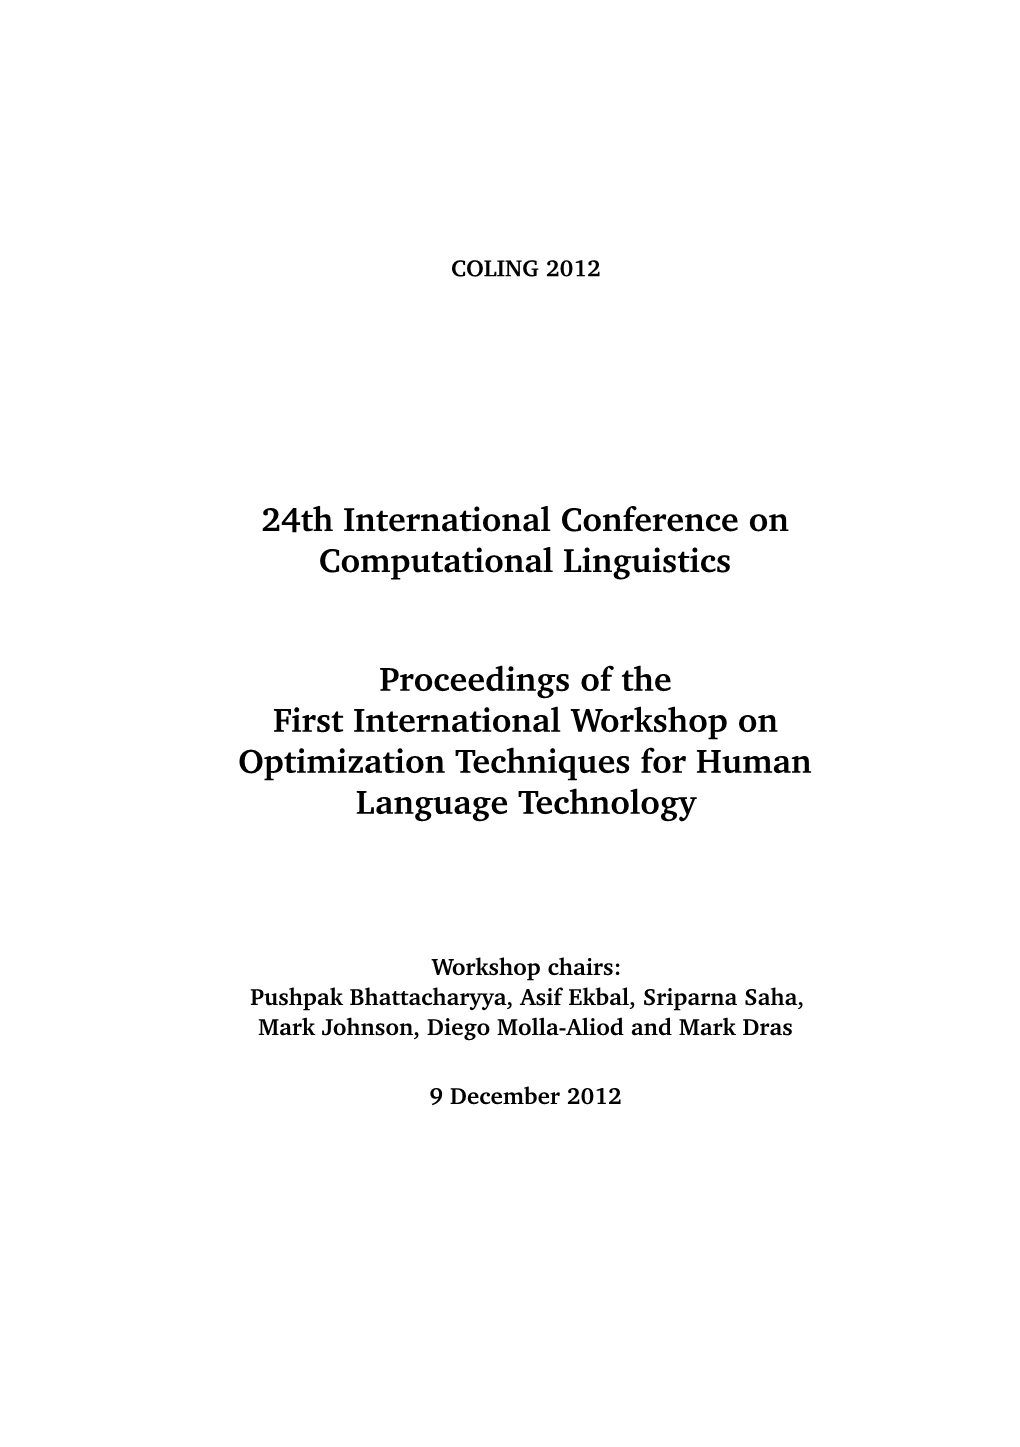 Proceedings of the First International Workshop on Optimization Techniques for Human Language Technology